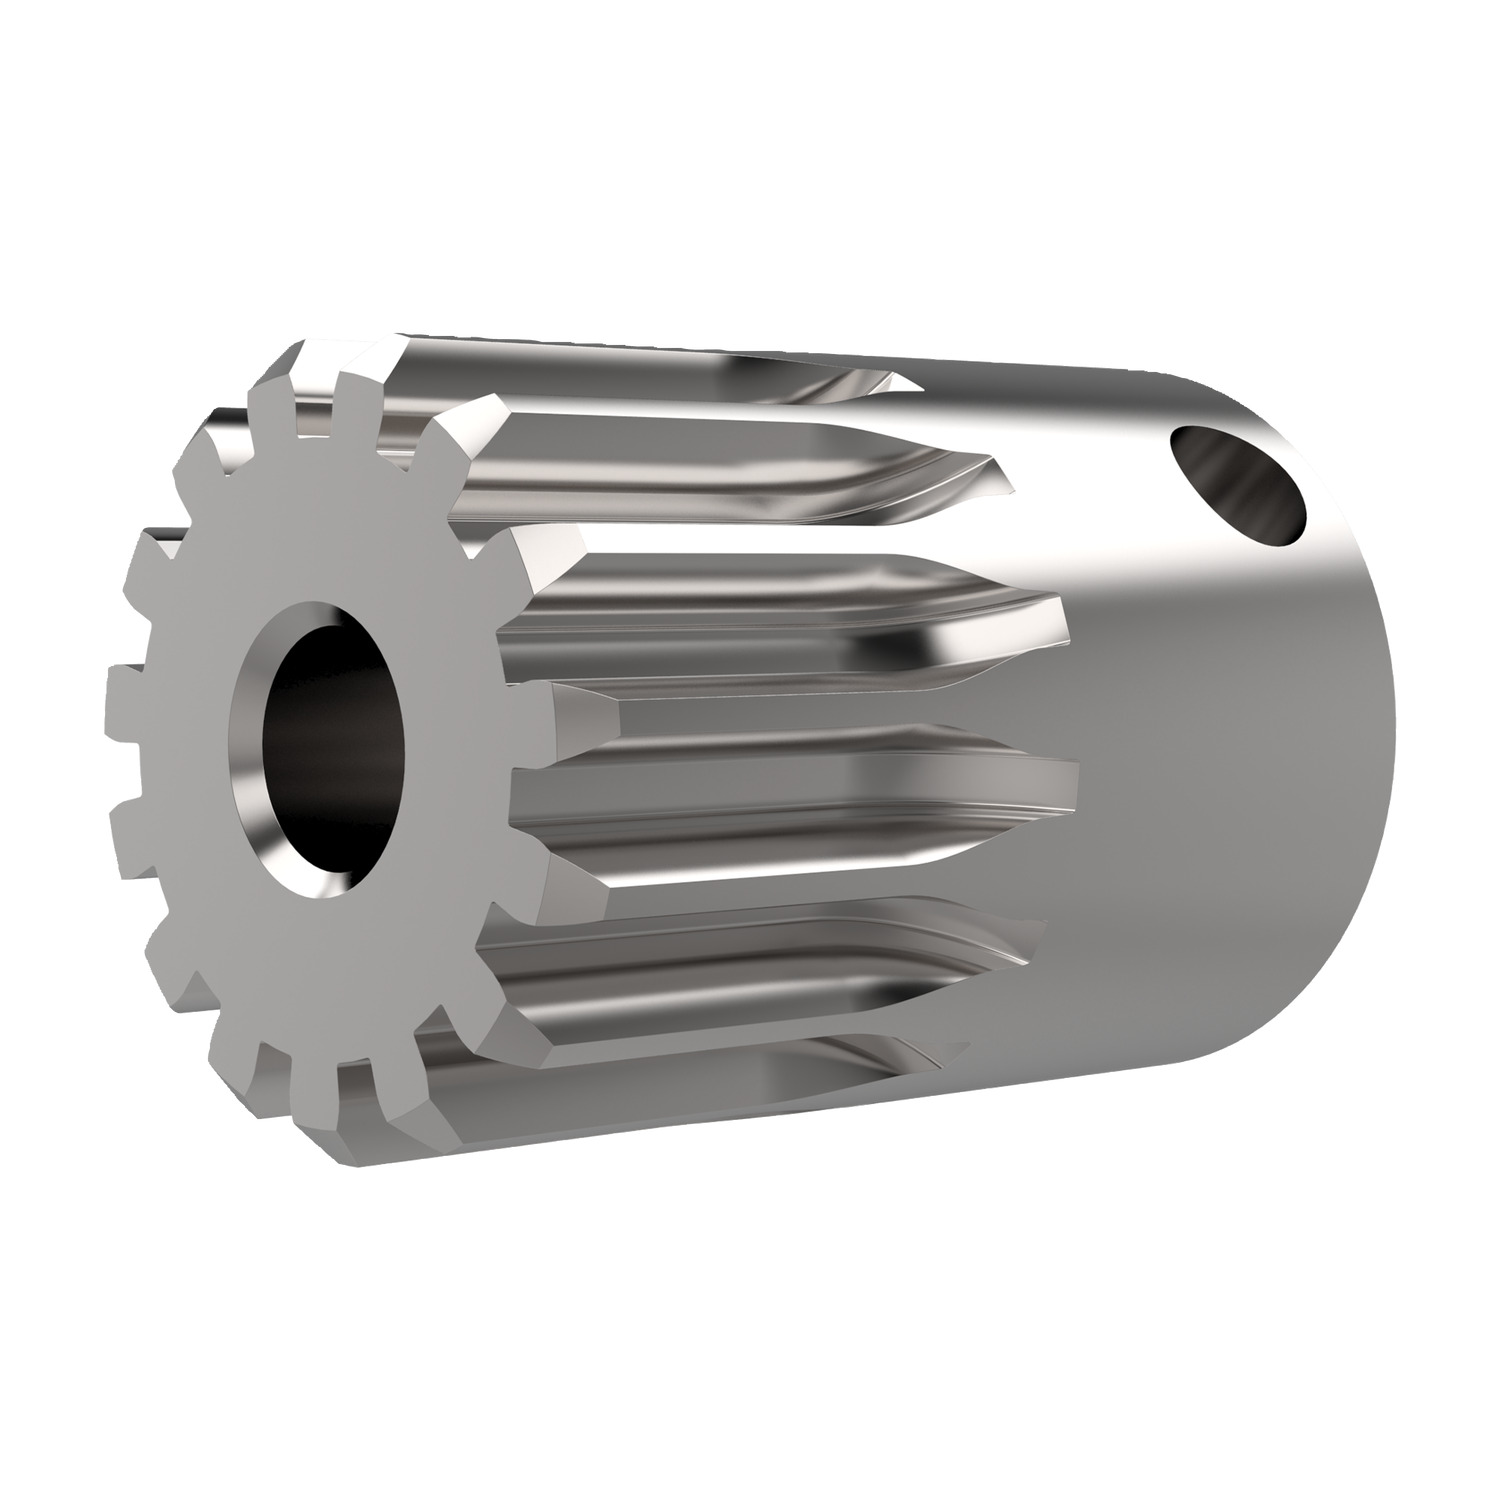 Product R5142, Spur Gears - Module 0.8 - Stainless stainless steel - 14-15 teeth / 